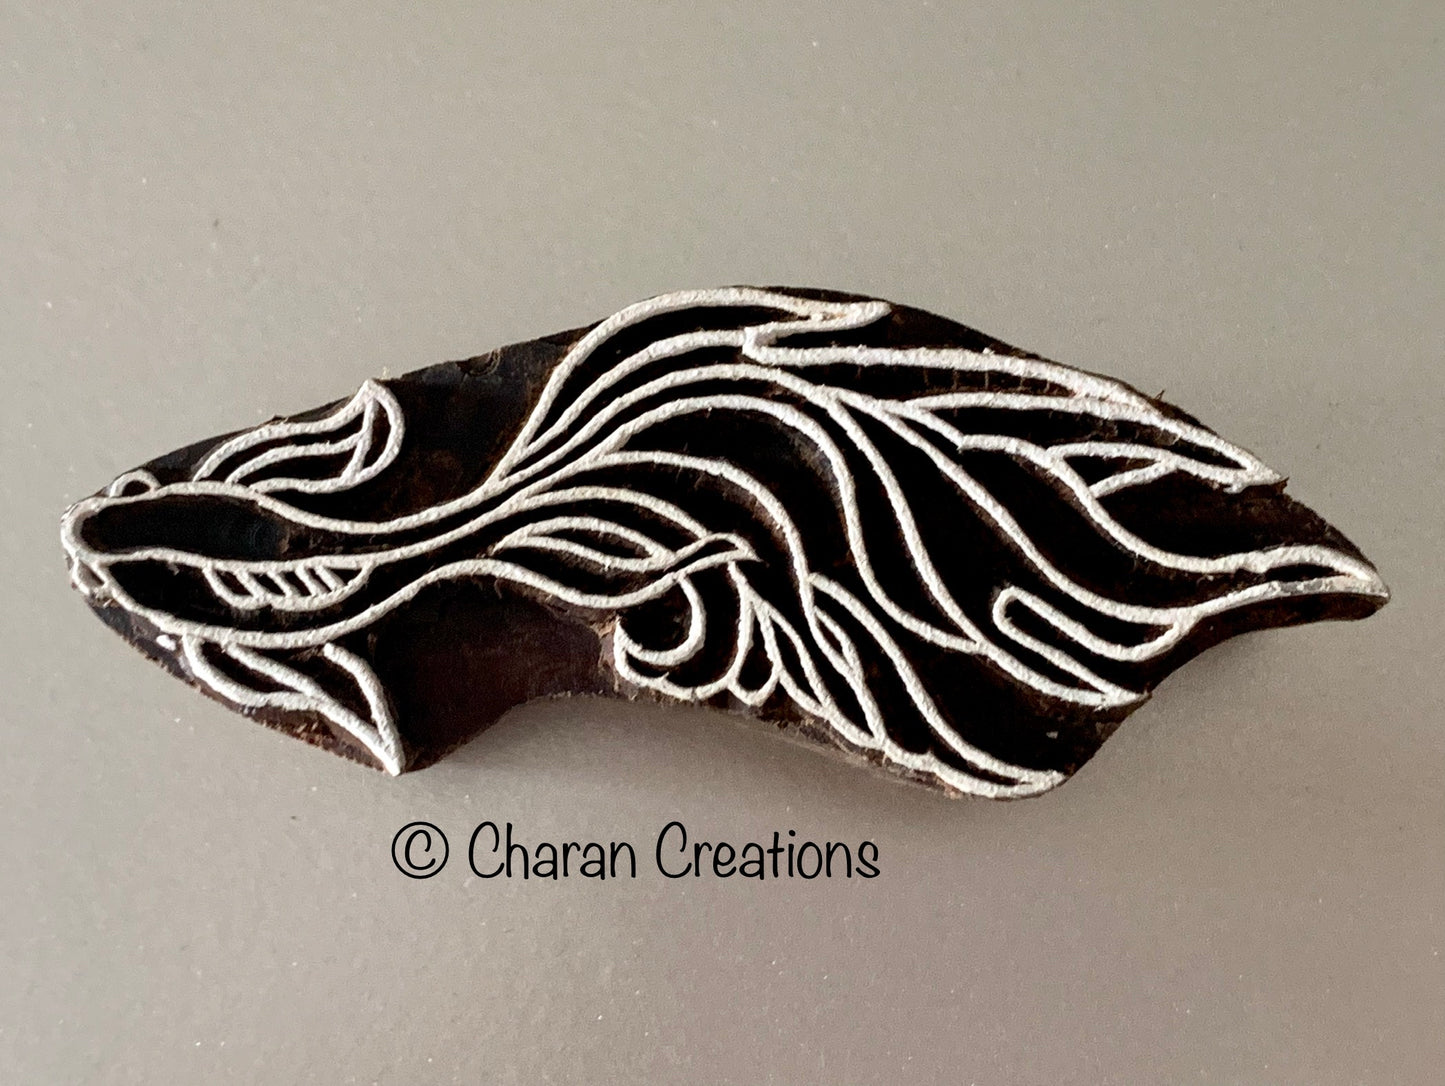 KOI FISH Hand carved wood block stamp for Printing/Pottery